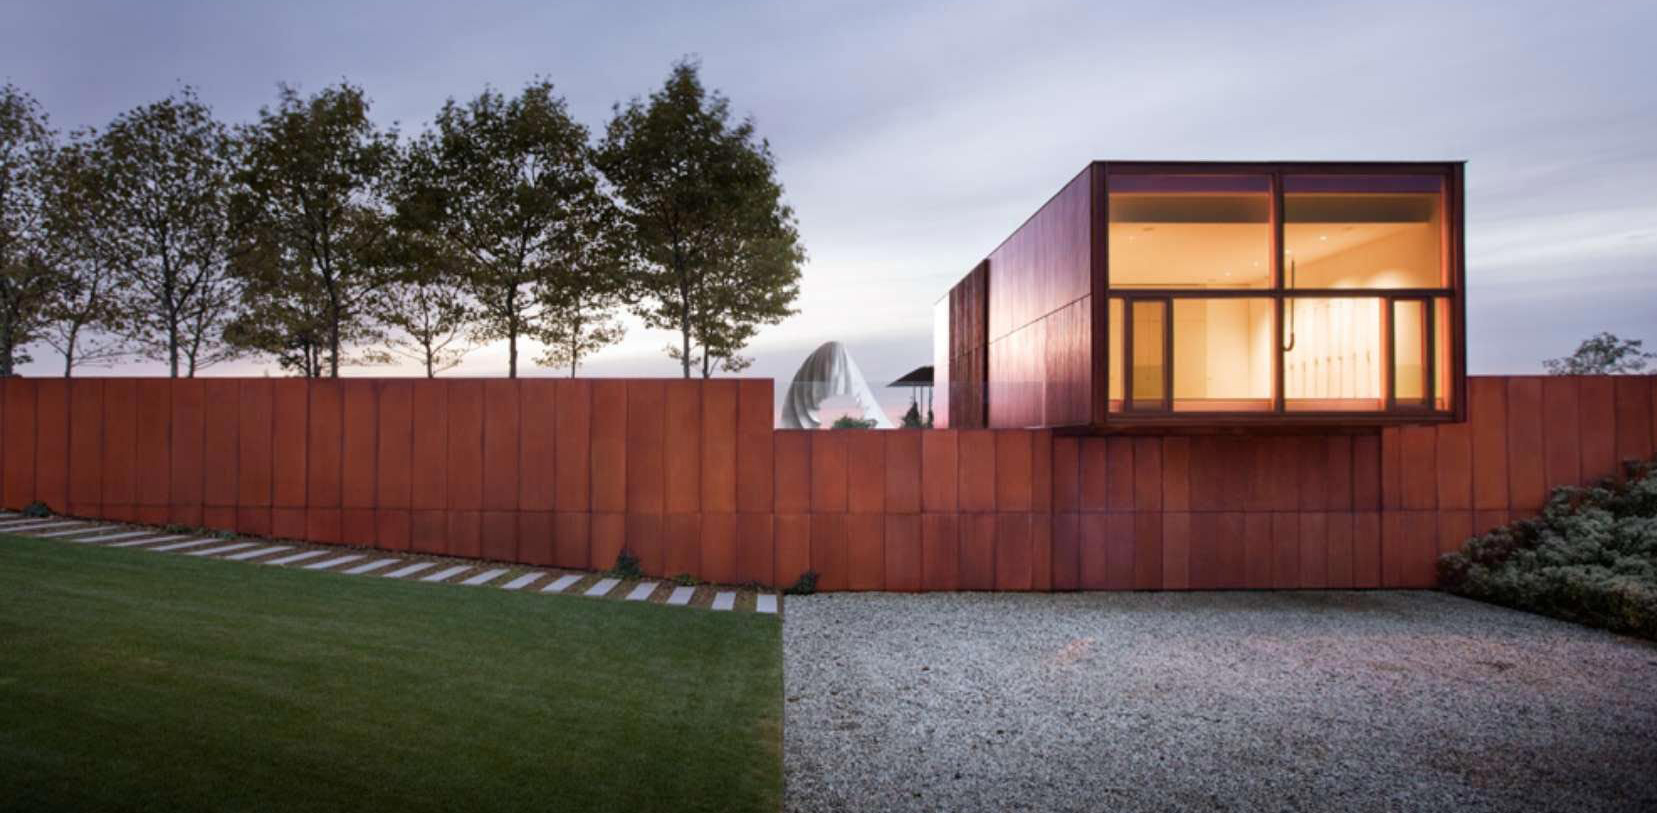 Weathering Steel: 12 Corten Houses Built for Resiliency - Architizer Journal